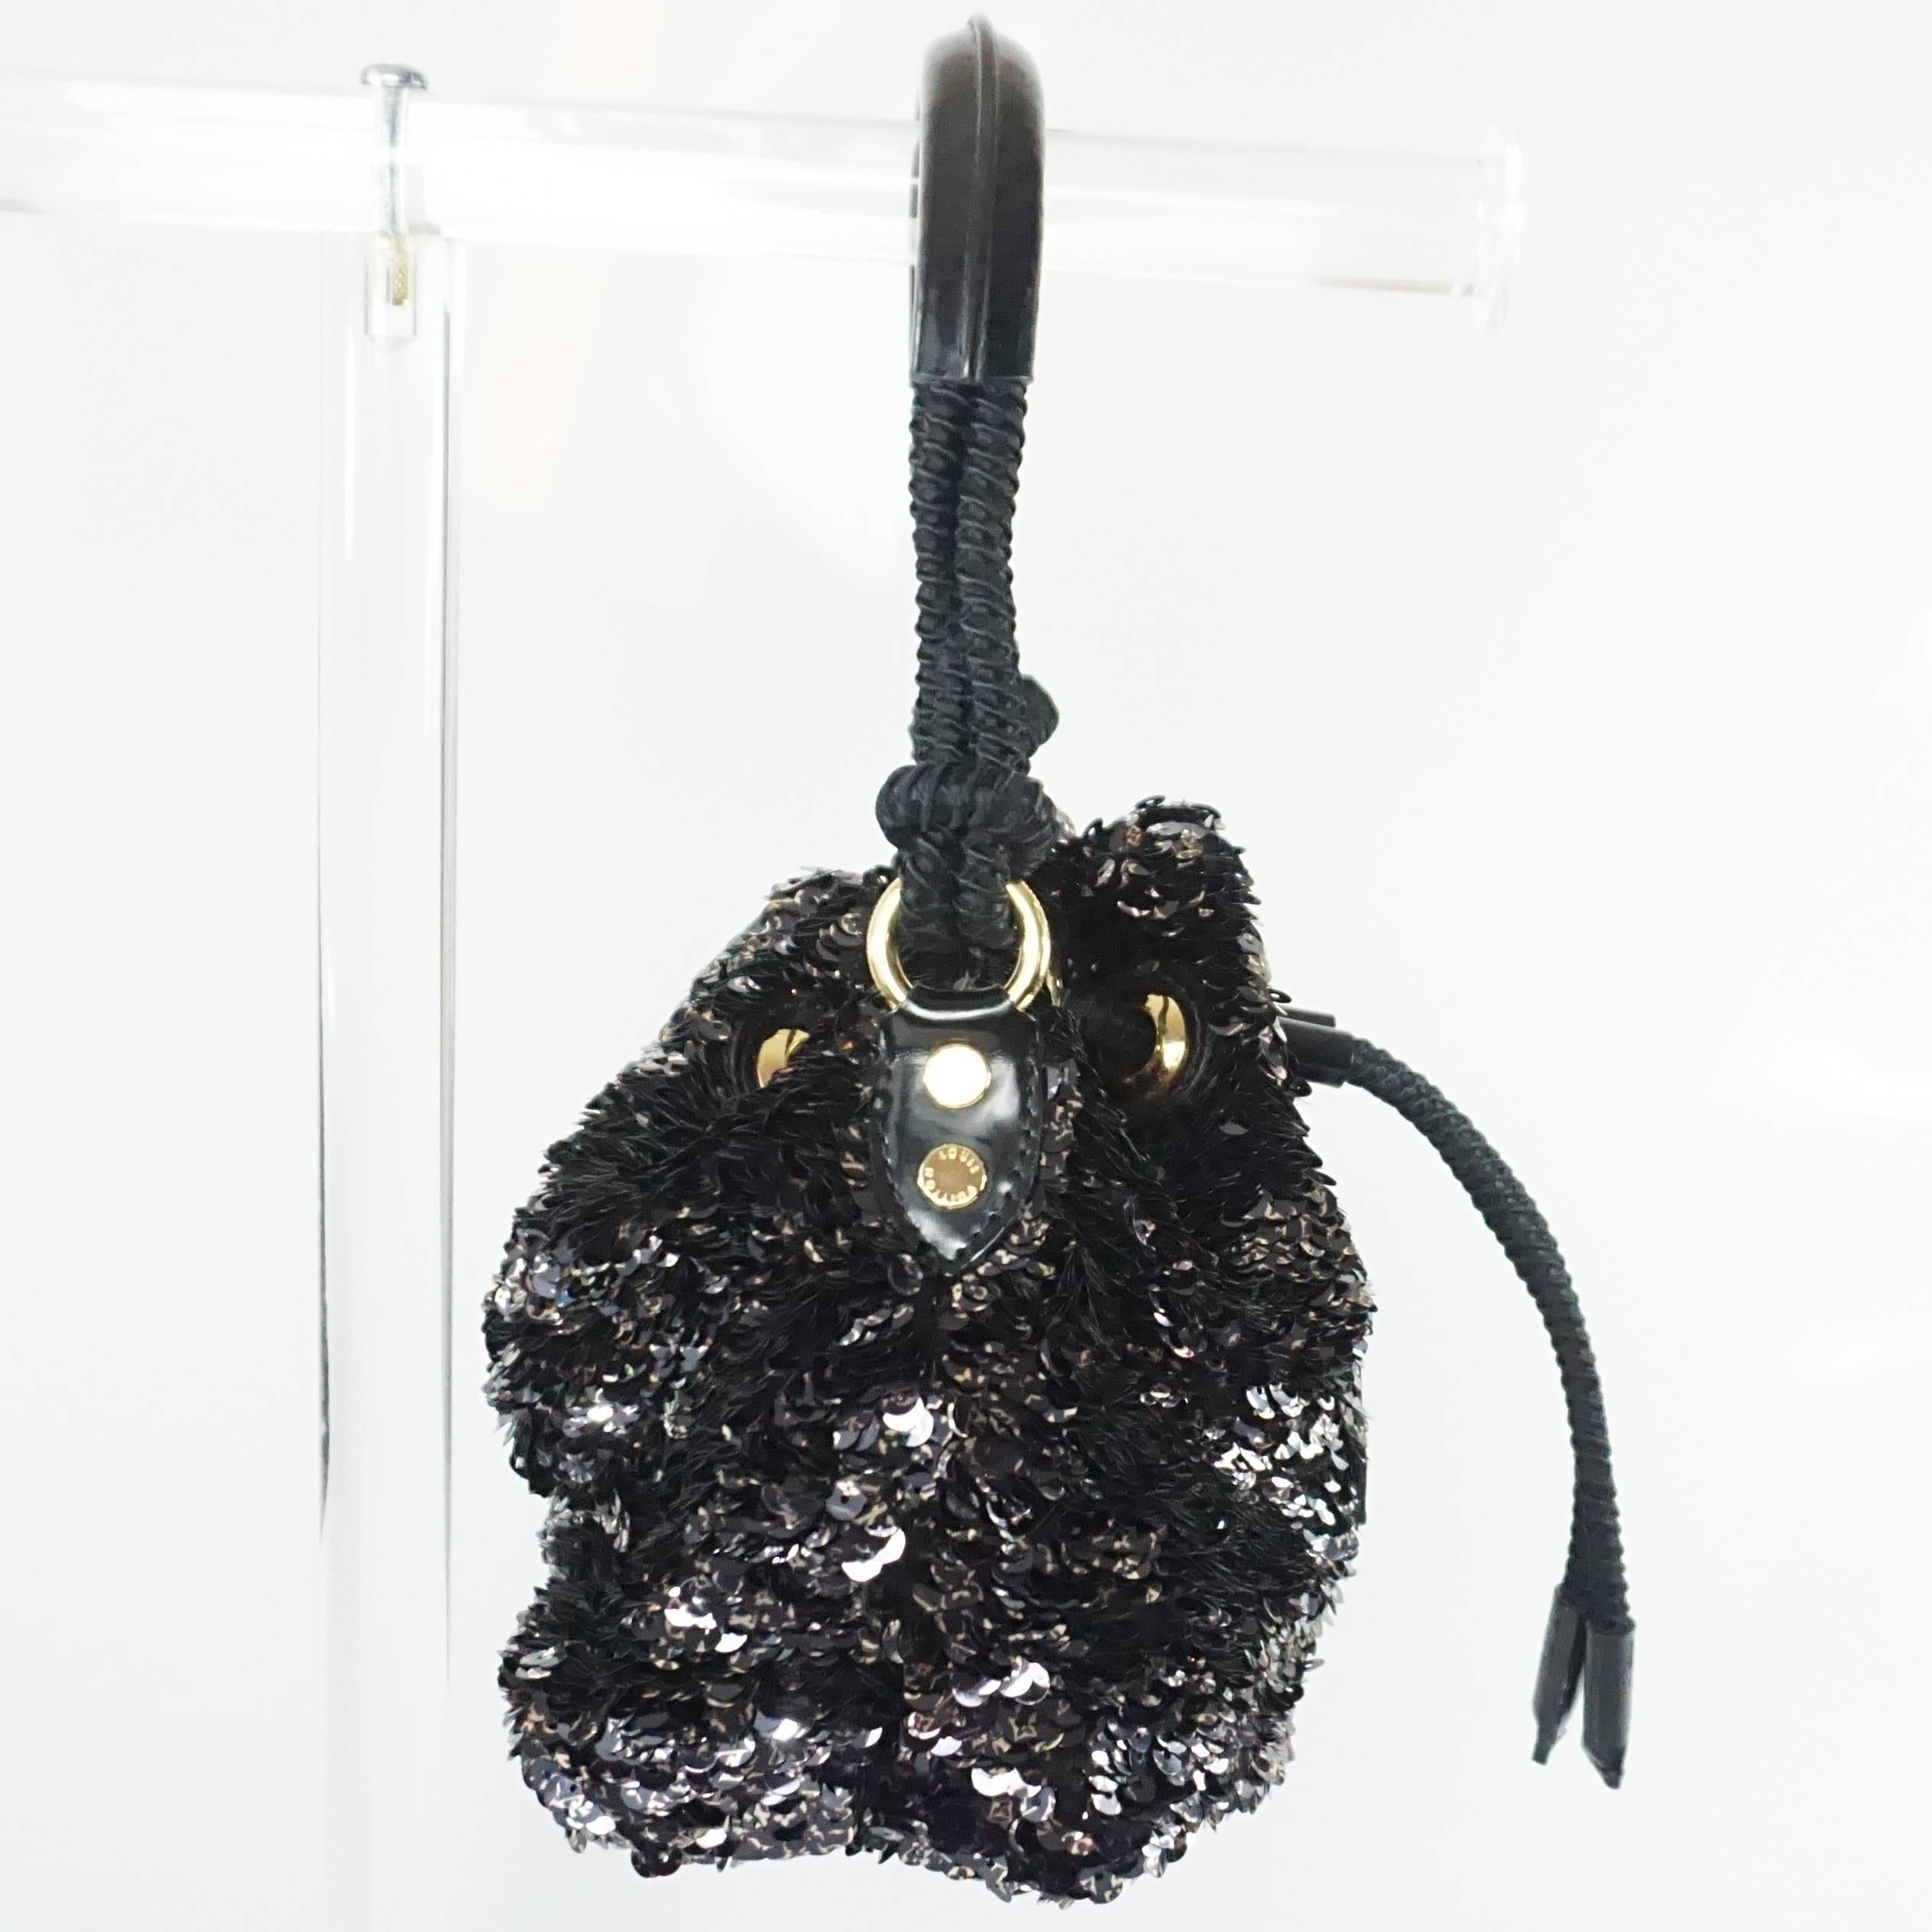 Louis Vuitton Black and Gold Limited Edition Sequin Mini Noe Rococo Handbag.  This handbag is in excellent condition and is from the cruise 2010 collection.

Measurements:
Width: 7.5